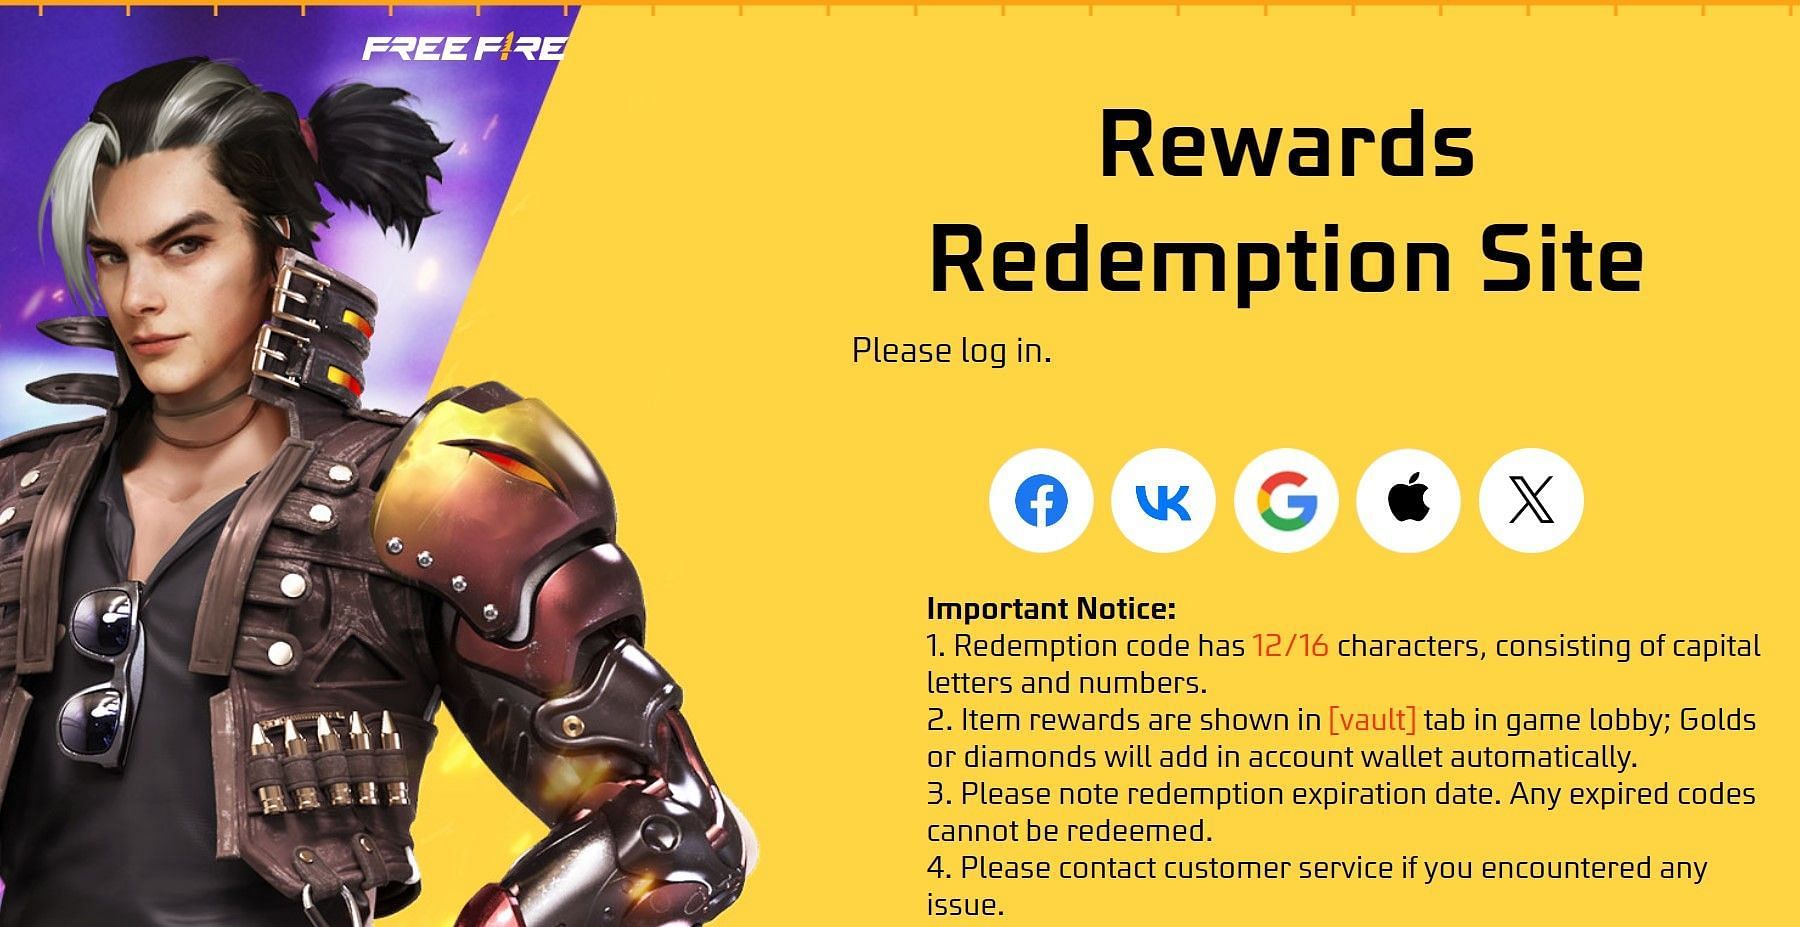 Log in using one of the platforms available on the website (Image via Garena)